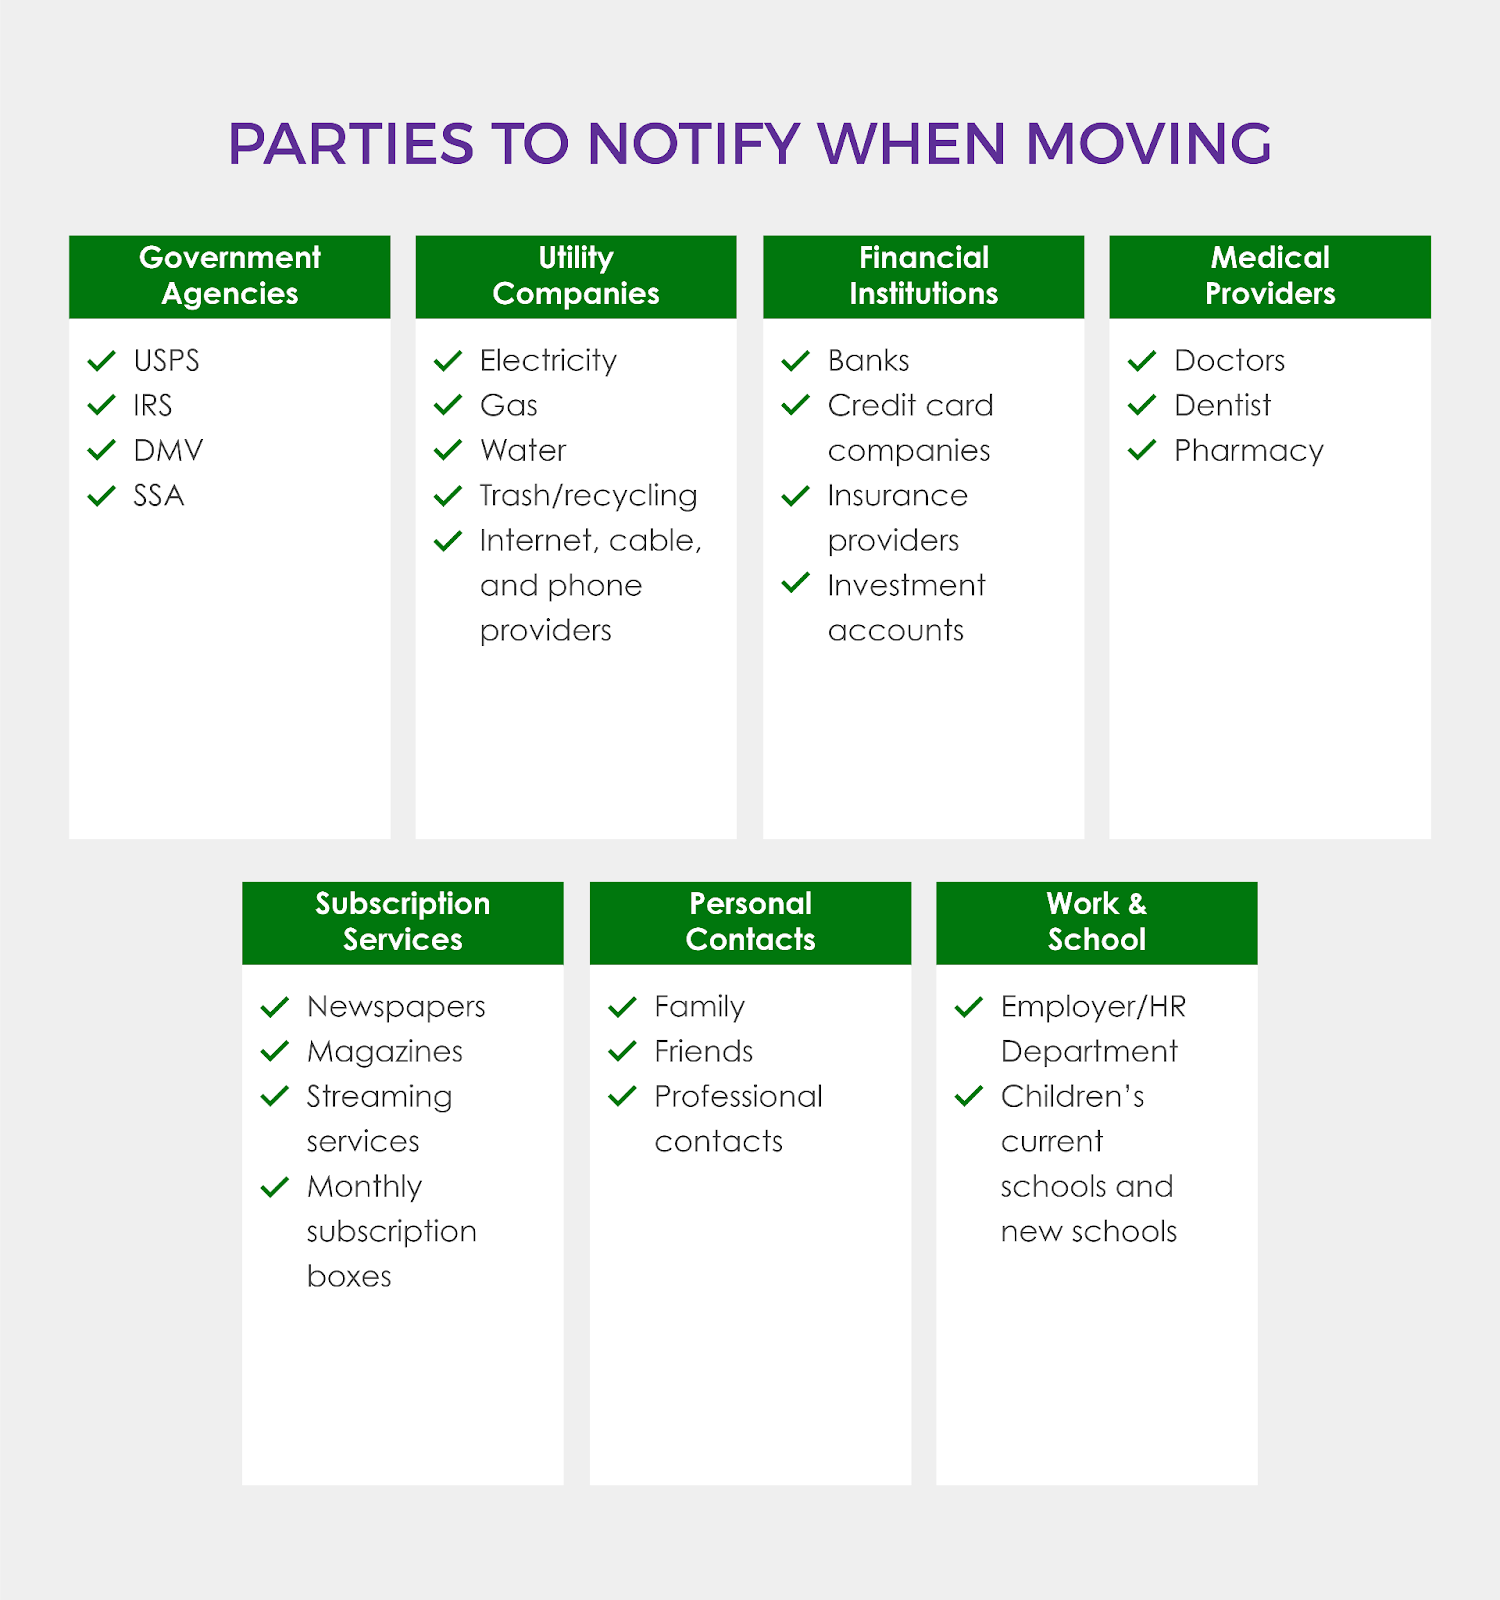 Parties to notify when moving